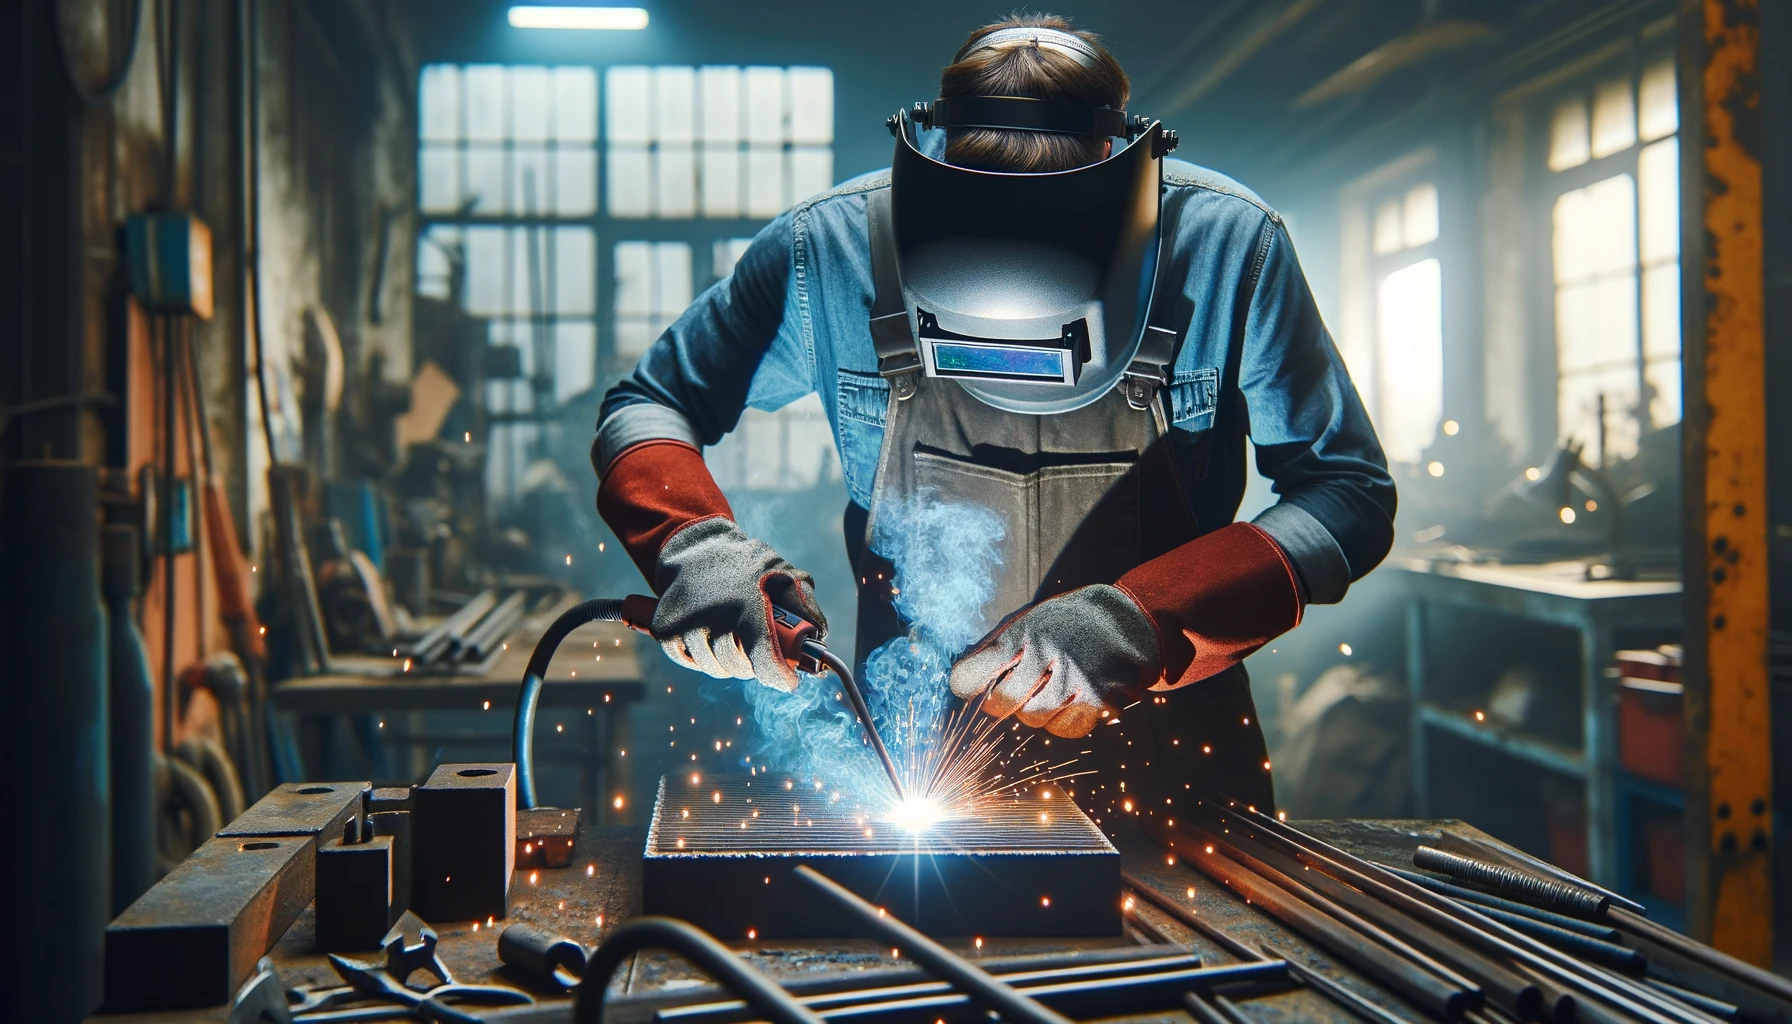 Professional welder in a workshop with protective gear and sparks flying.